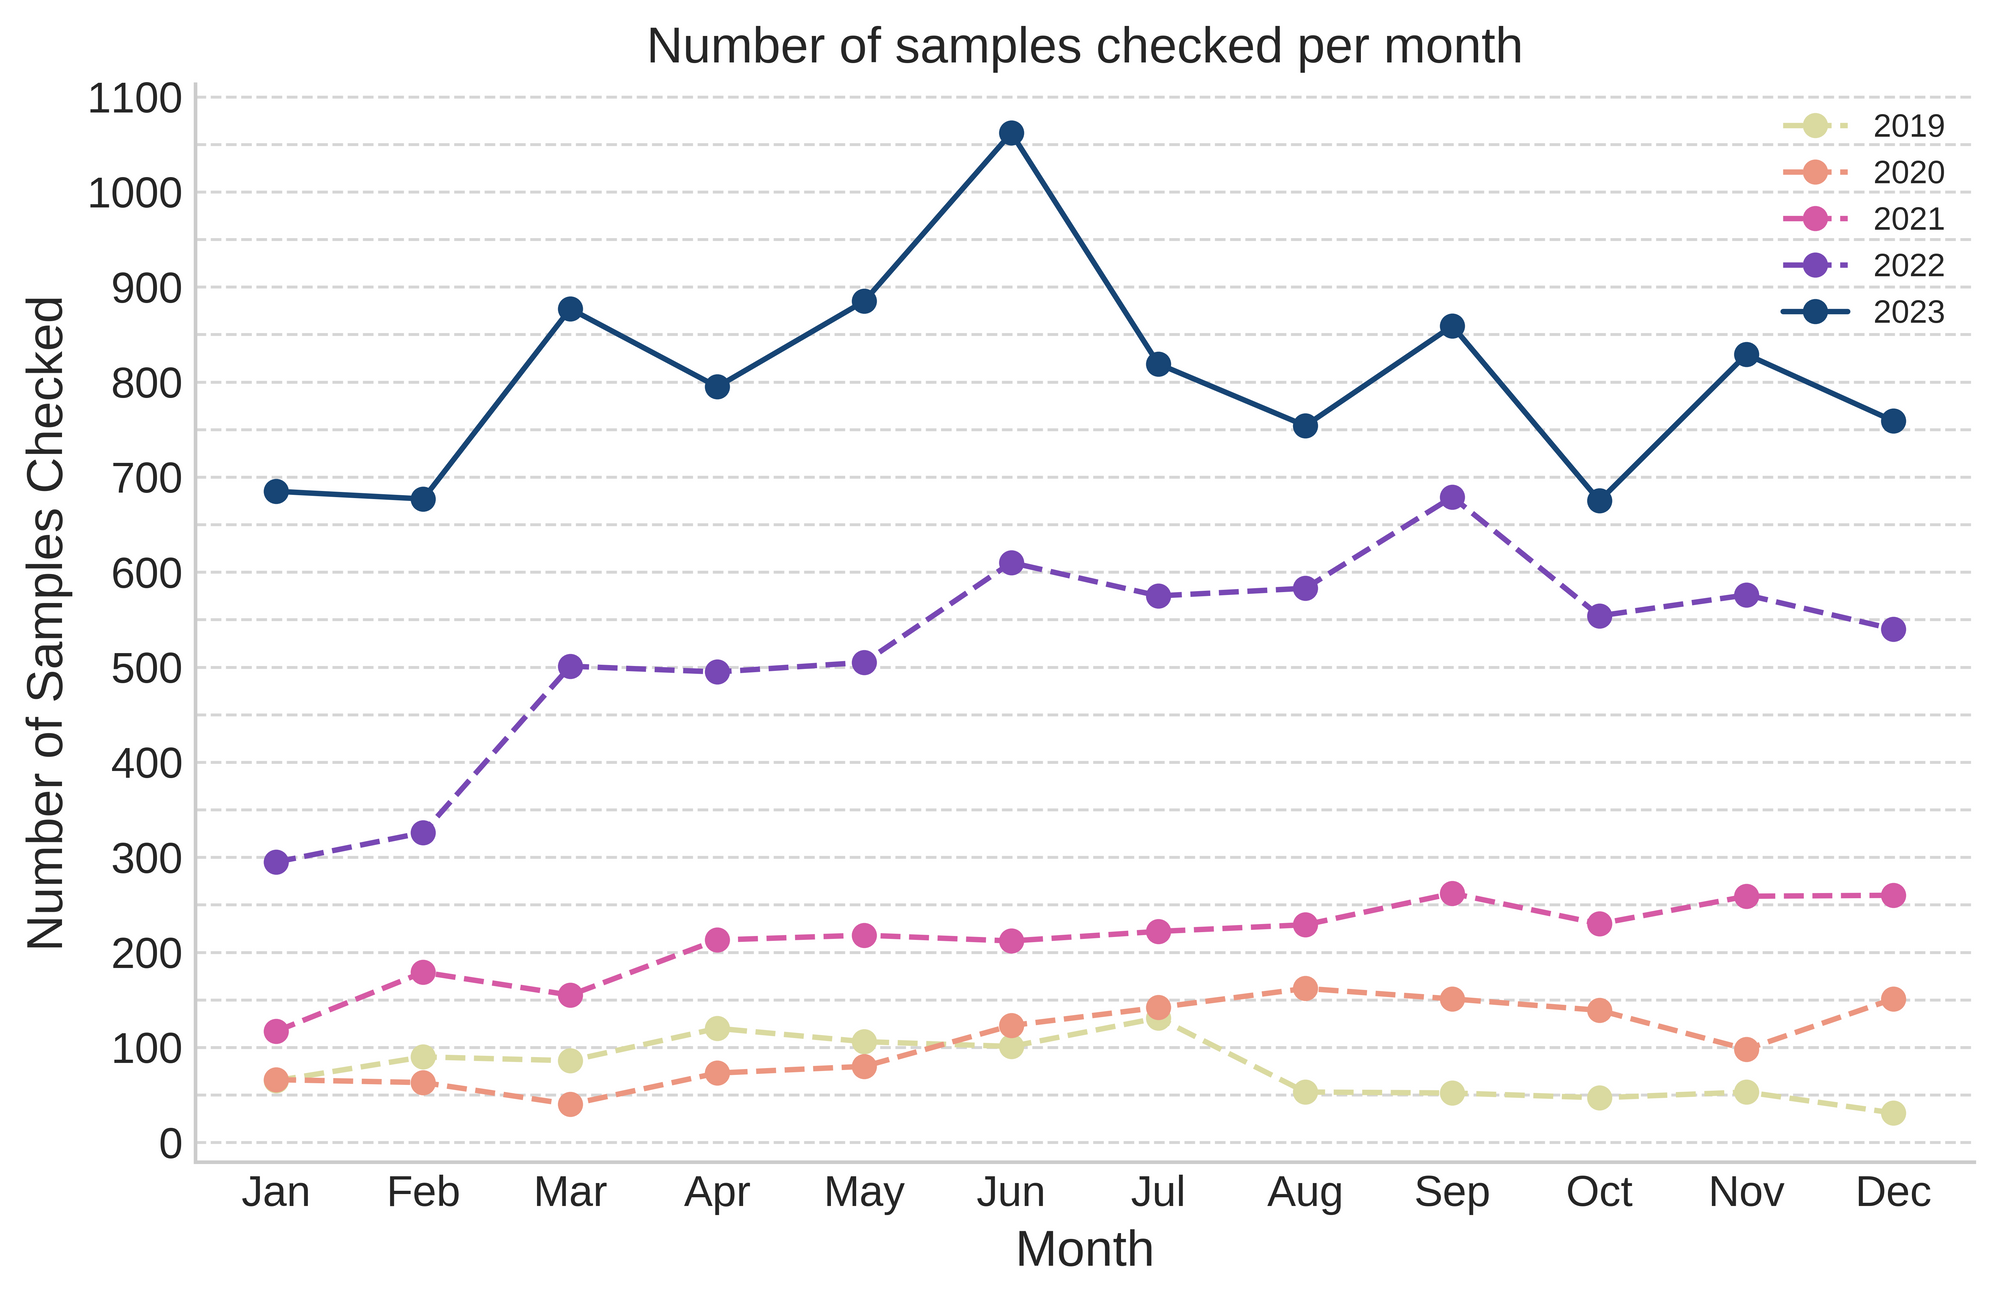 Figure 1. Number of samples checked per month between 2019 and 2023, across all service locations.